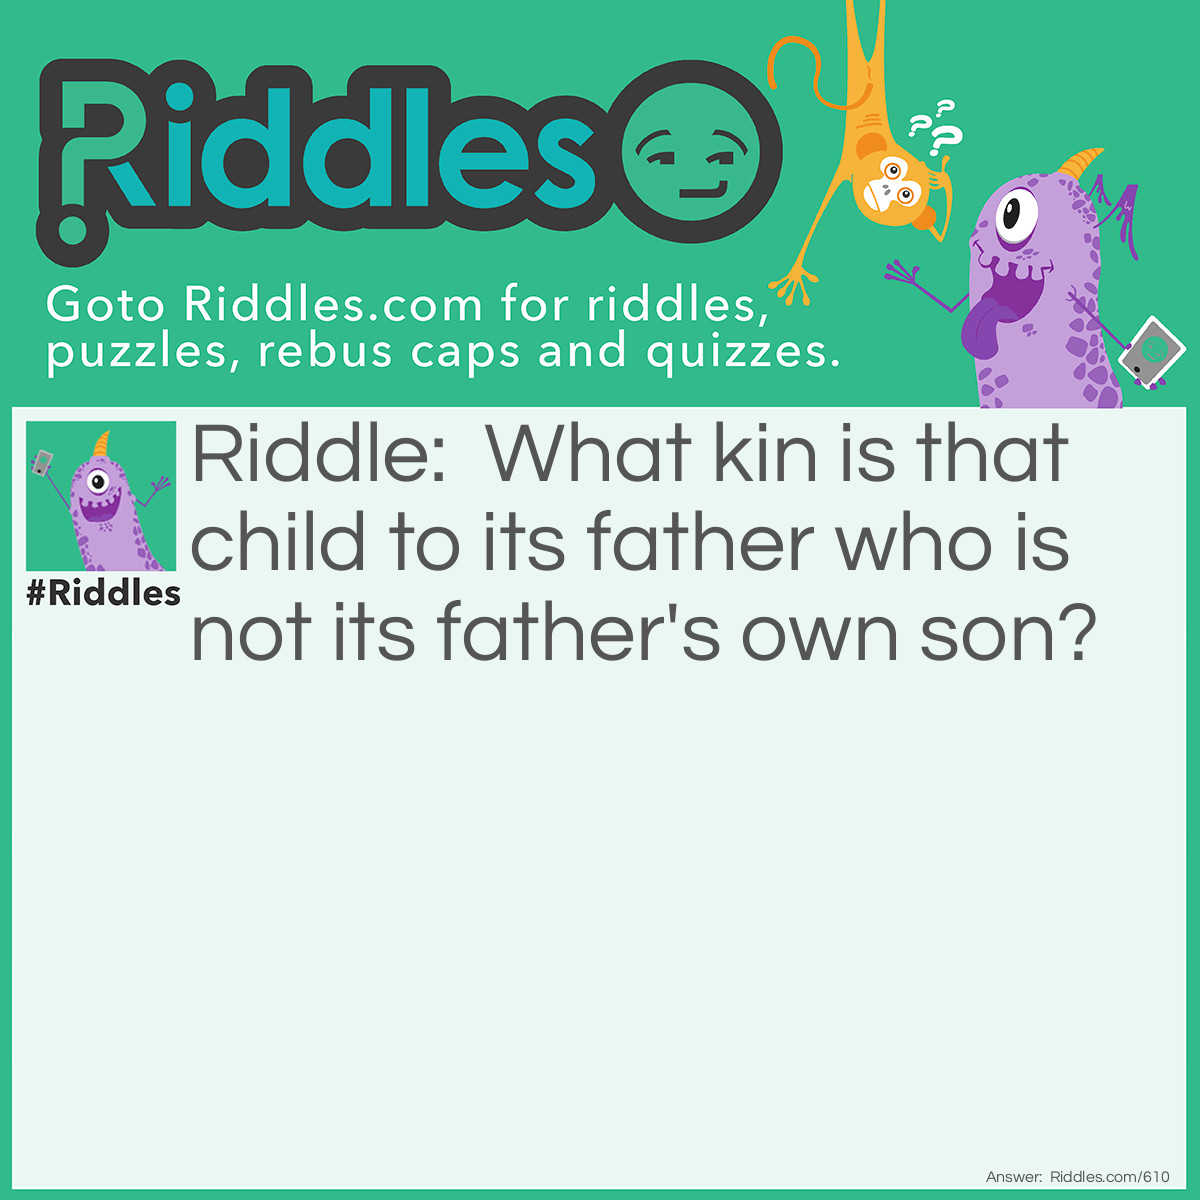 Riddle: What kin is that child to it's father who is not it's father's own son? Answer: His daughter.